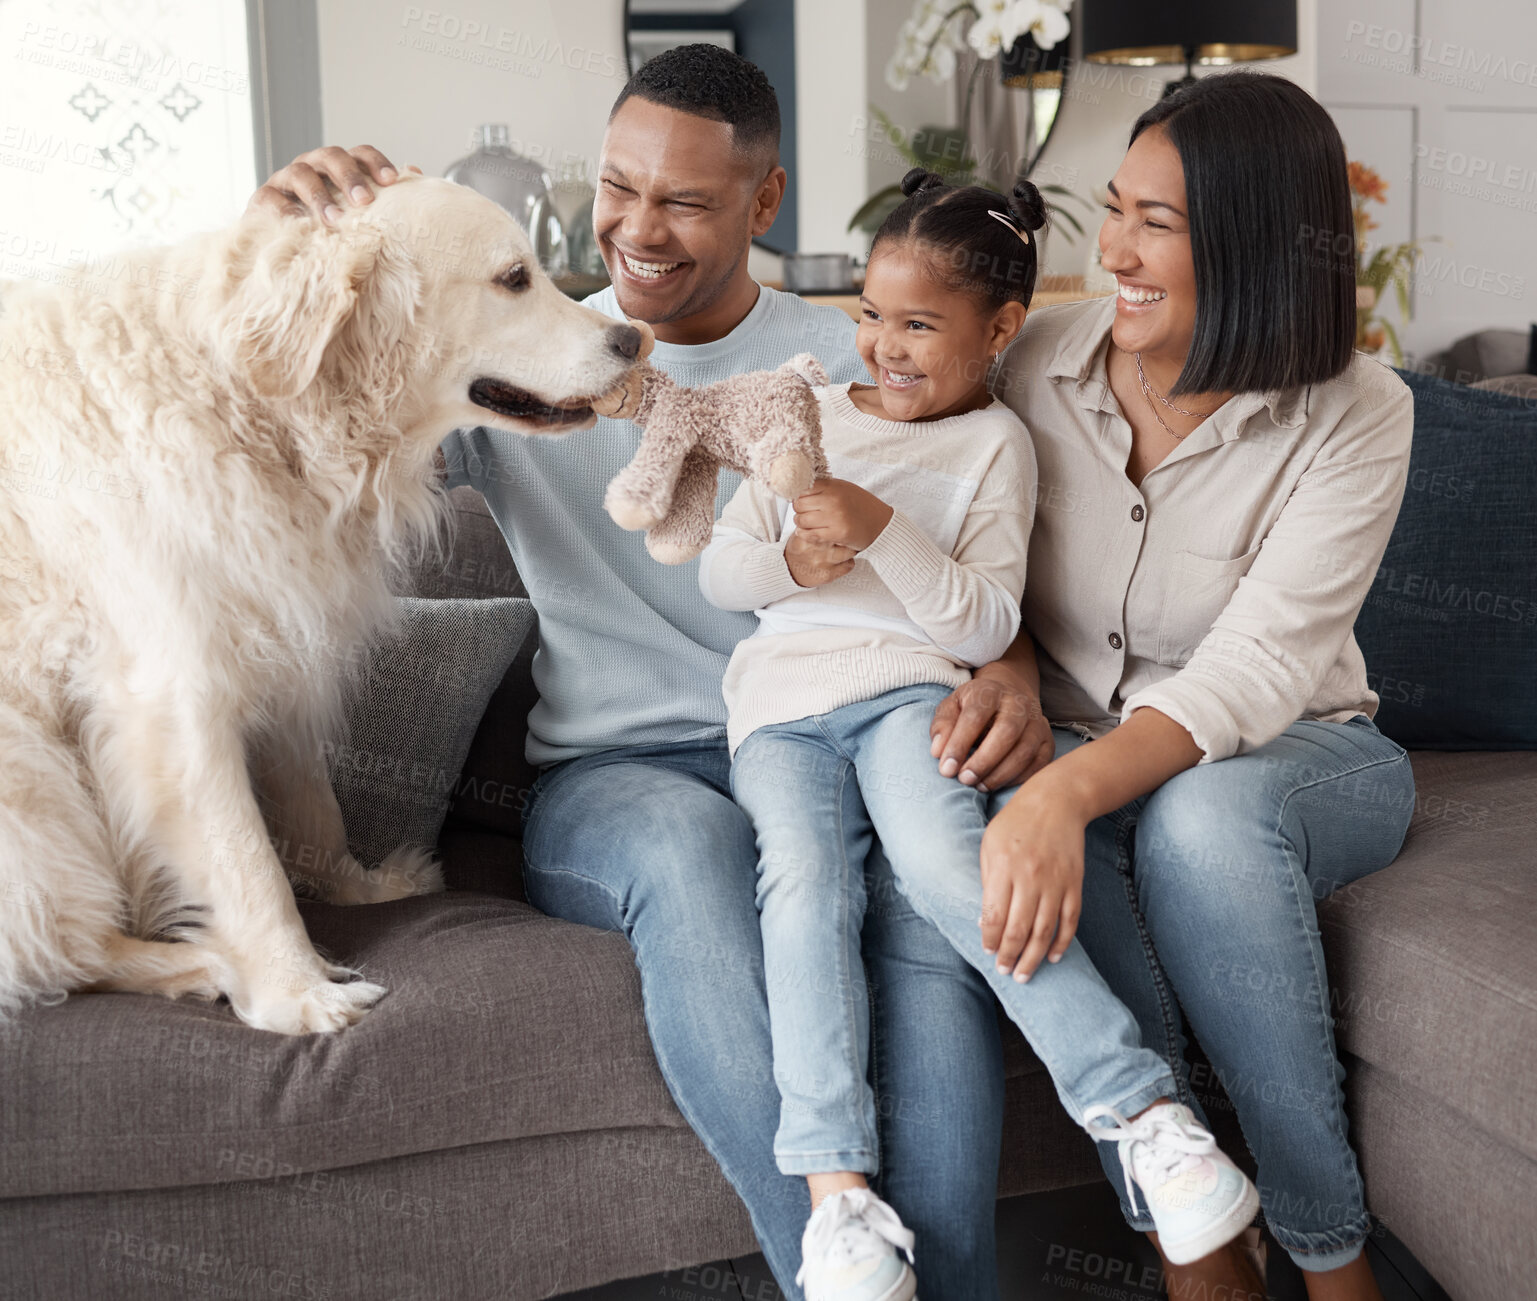 Buy stock photo A happy mixed race family of three relaxing on the sofa with their dog. Loving black family being affectionate with a foster animal. Young couple bonding with their daughter and rescued puppy at home